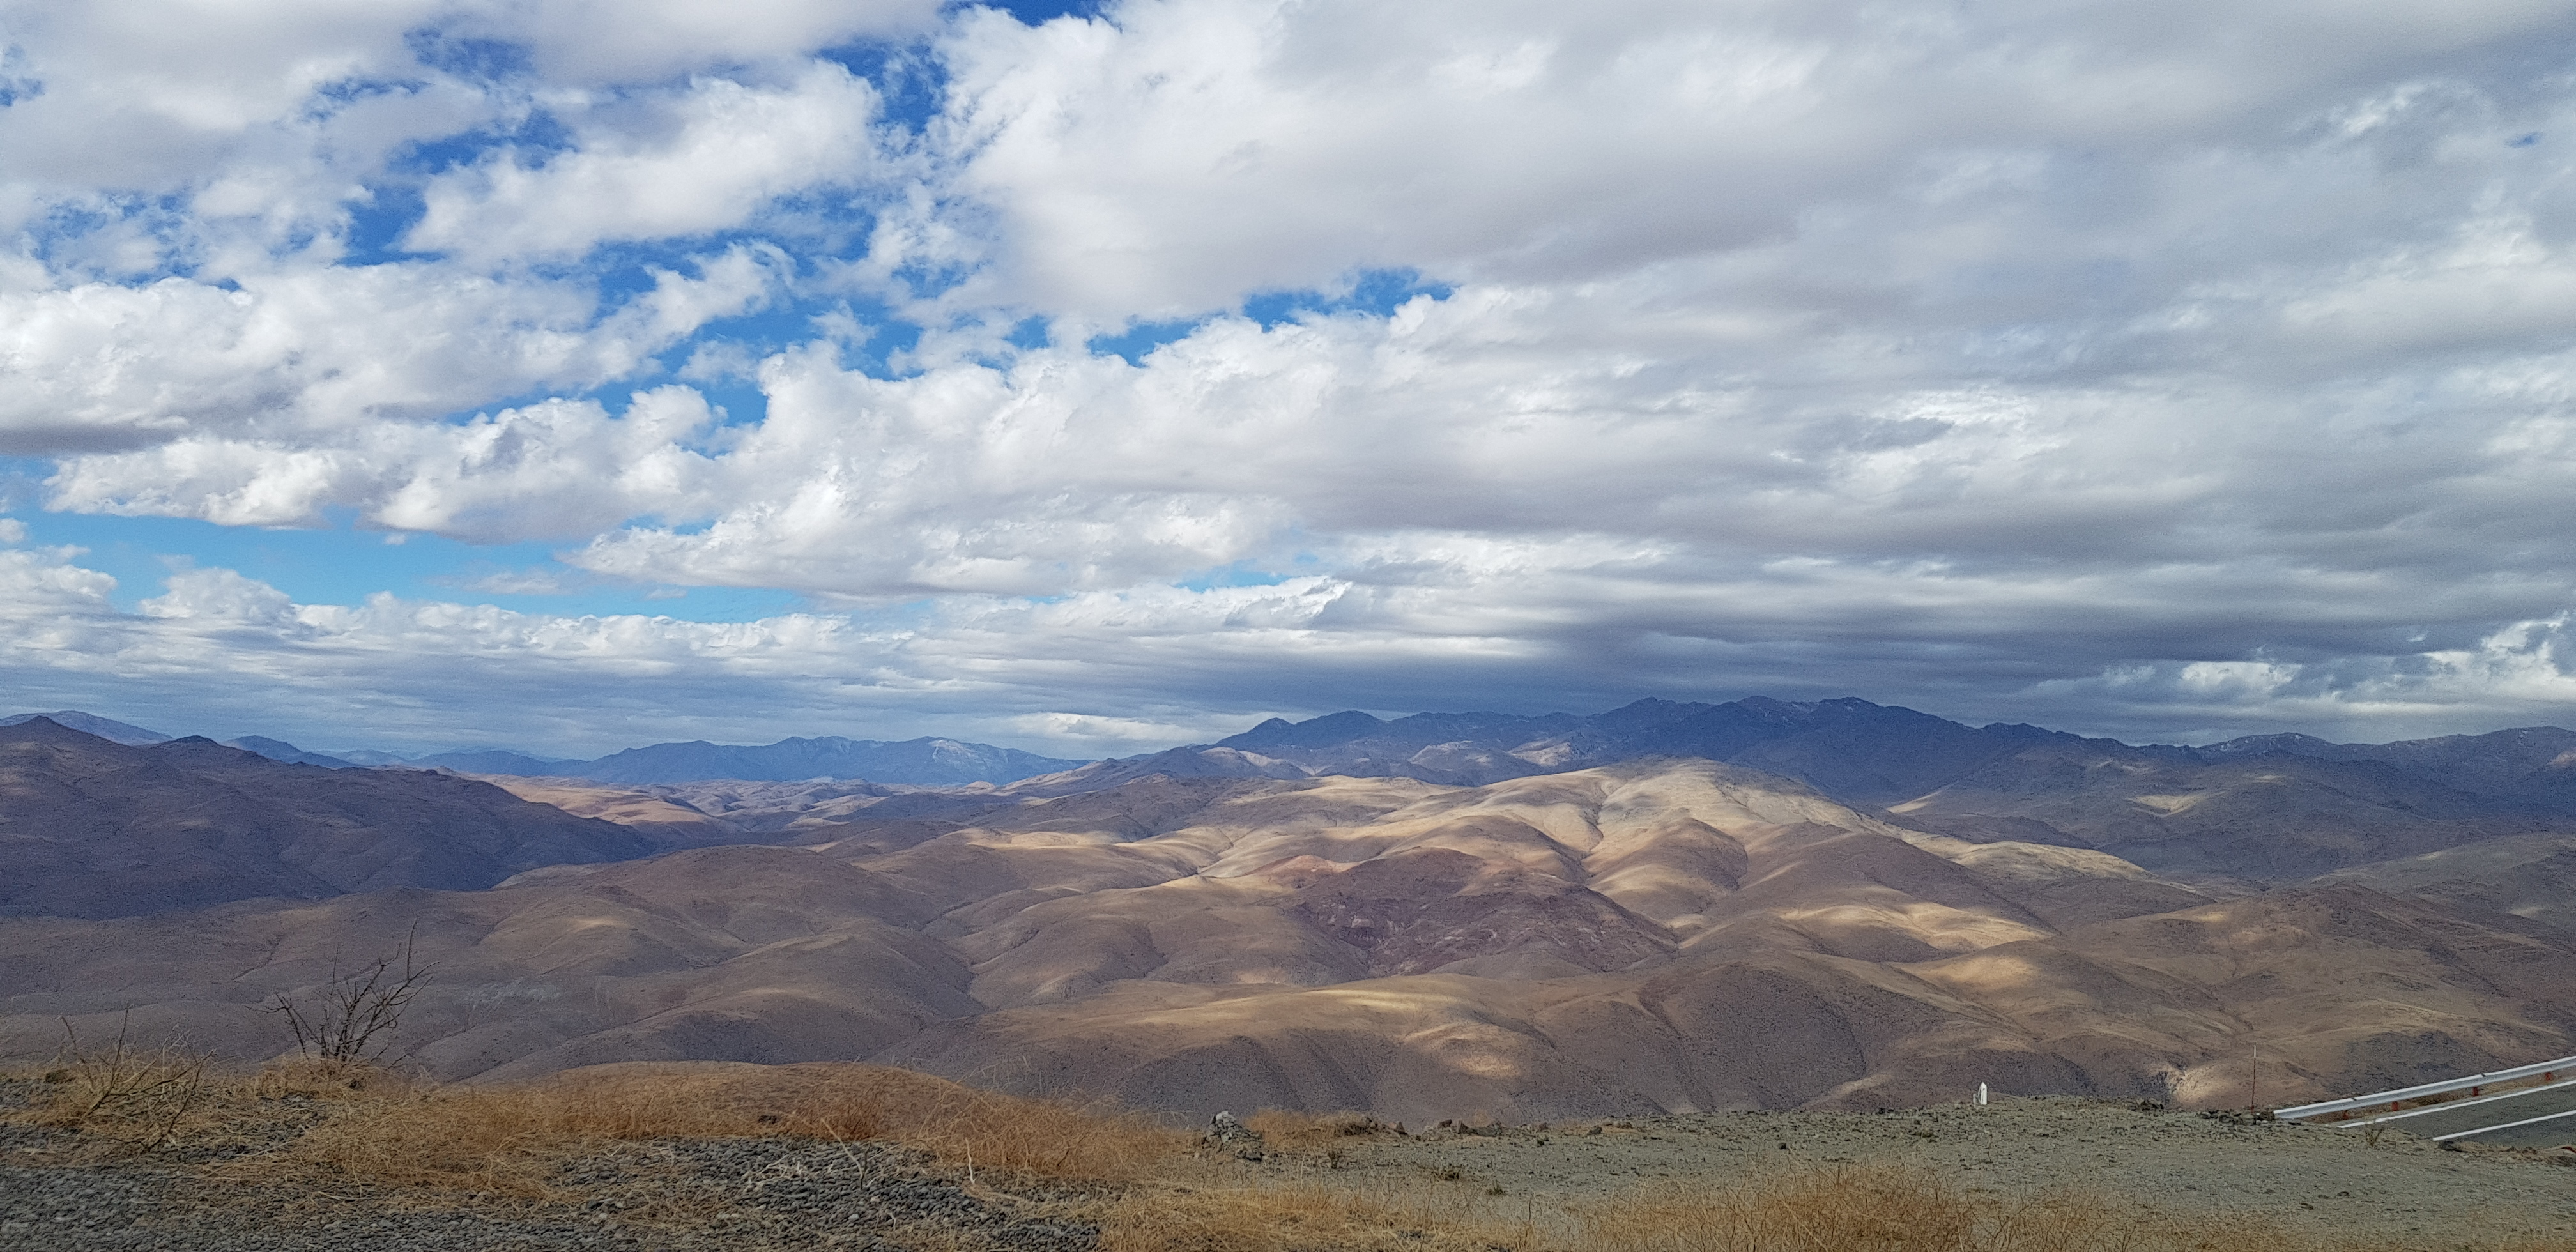 Horrible conditions for astronomy, but fantastic view of the Atacama desert